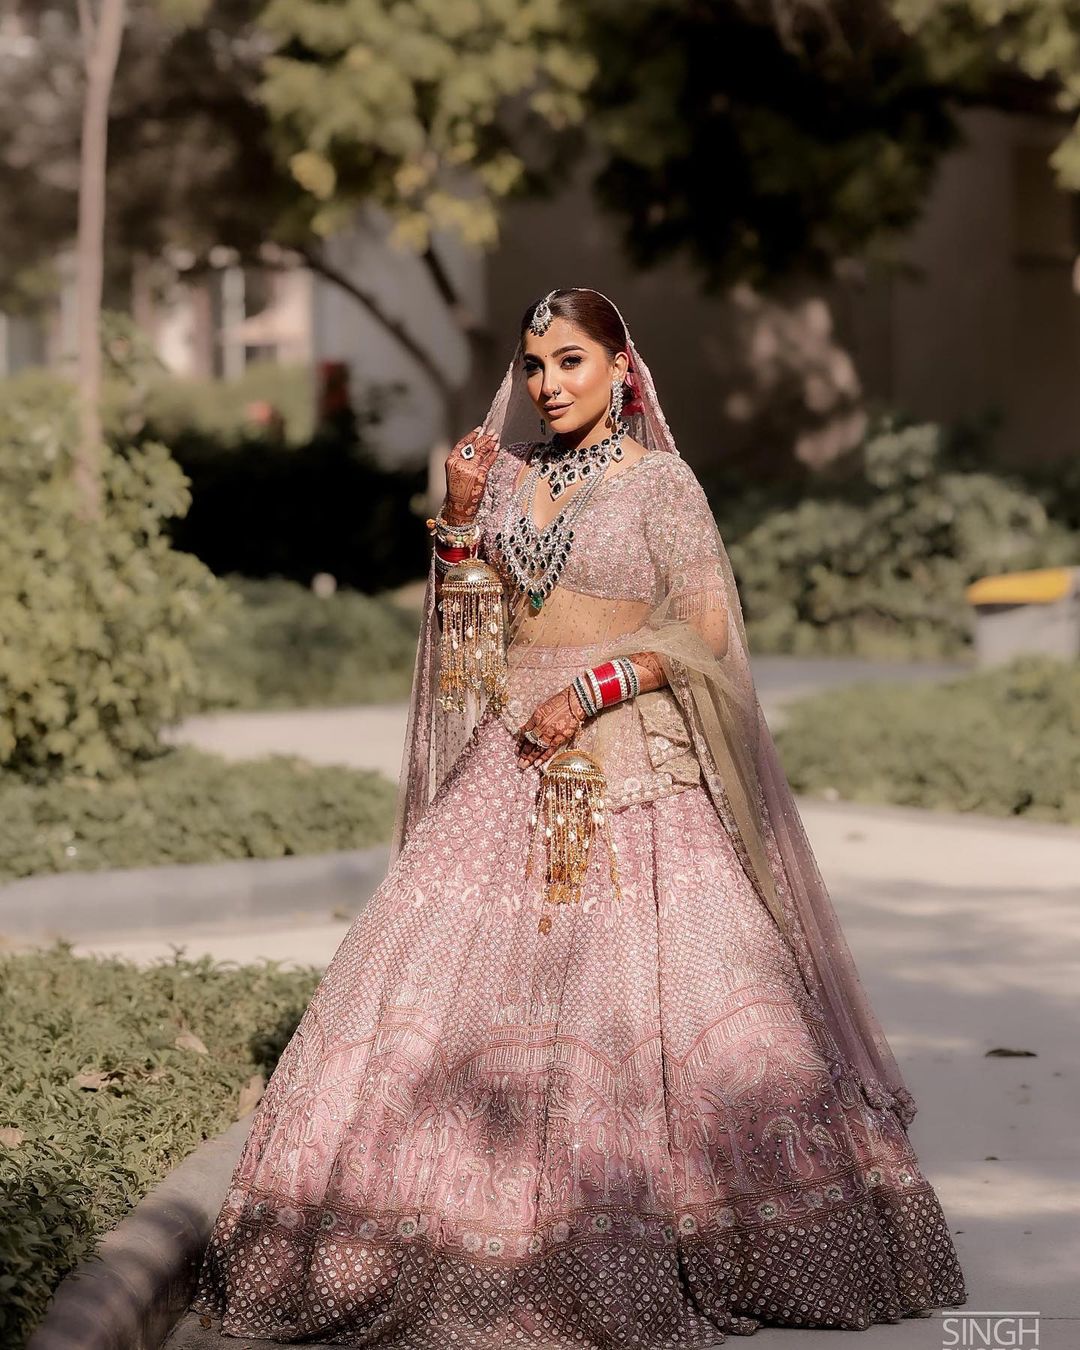 Kiara Advani in a gorgeous pastel blue and pink designer lehenga for a  wedding event in… | Indian bridesmaid dresses, Wedding lehenga designs,  Indian bridal outfits